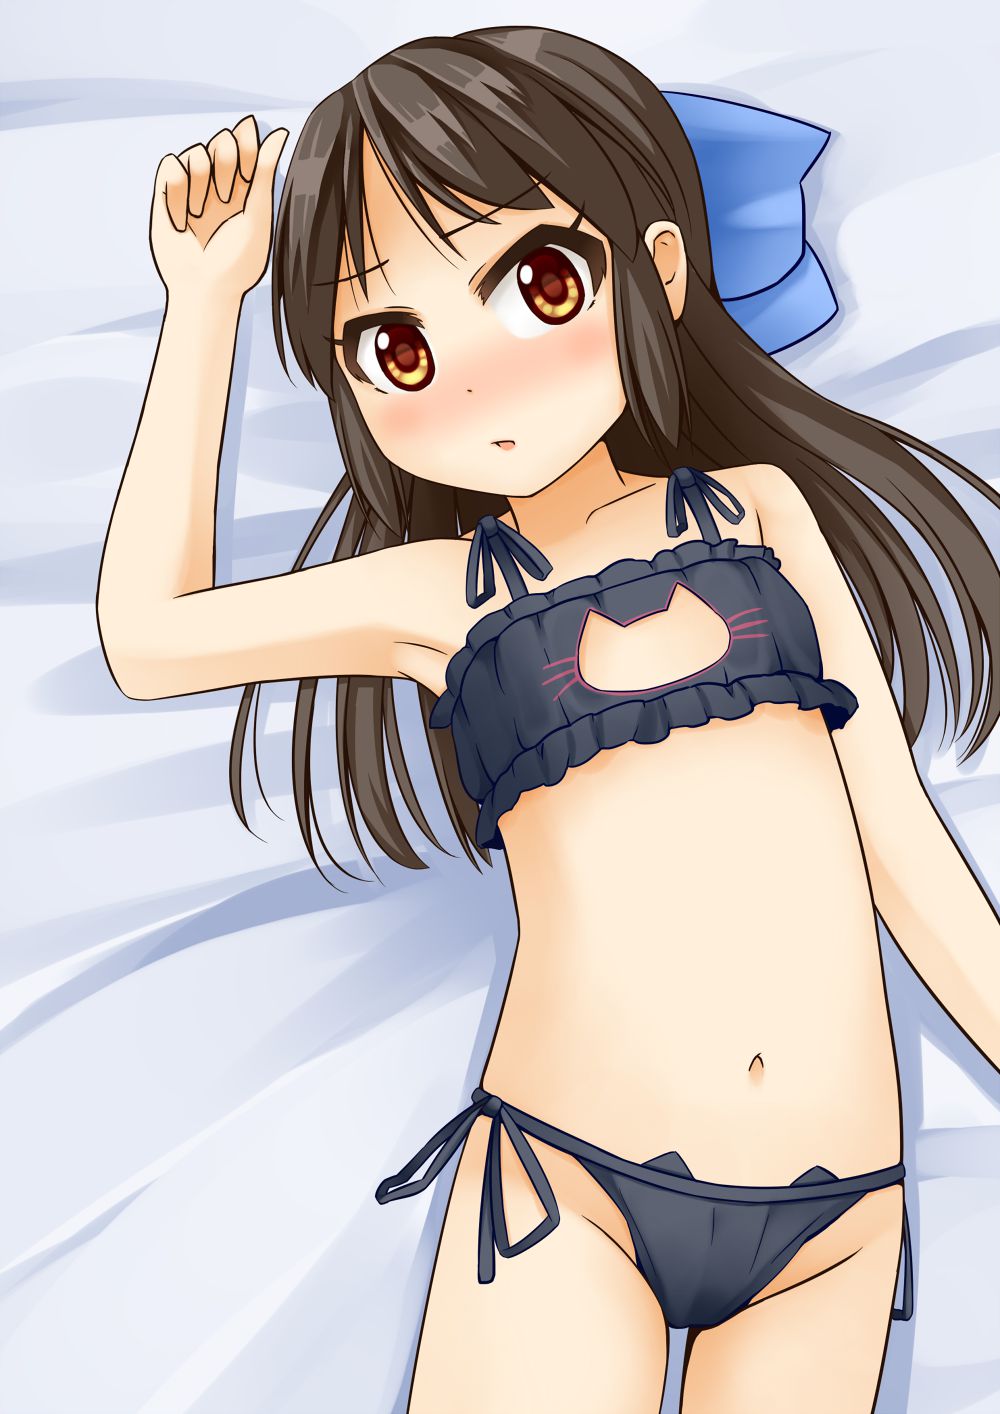 [39 pieces] I take an eroticism image having a cute the youth shorts & youth bra which is suitable for age of ガチ primary schoolchild Lolly Arisu Tachibana of デレマス! 37